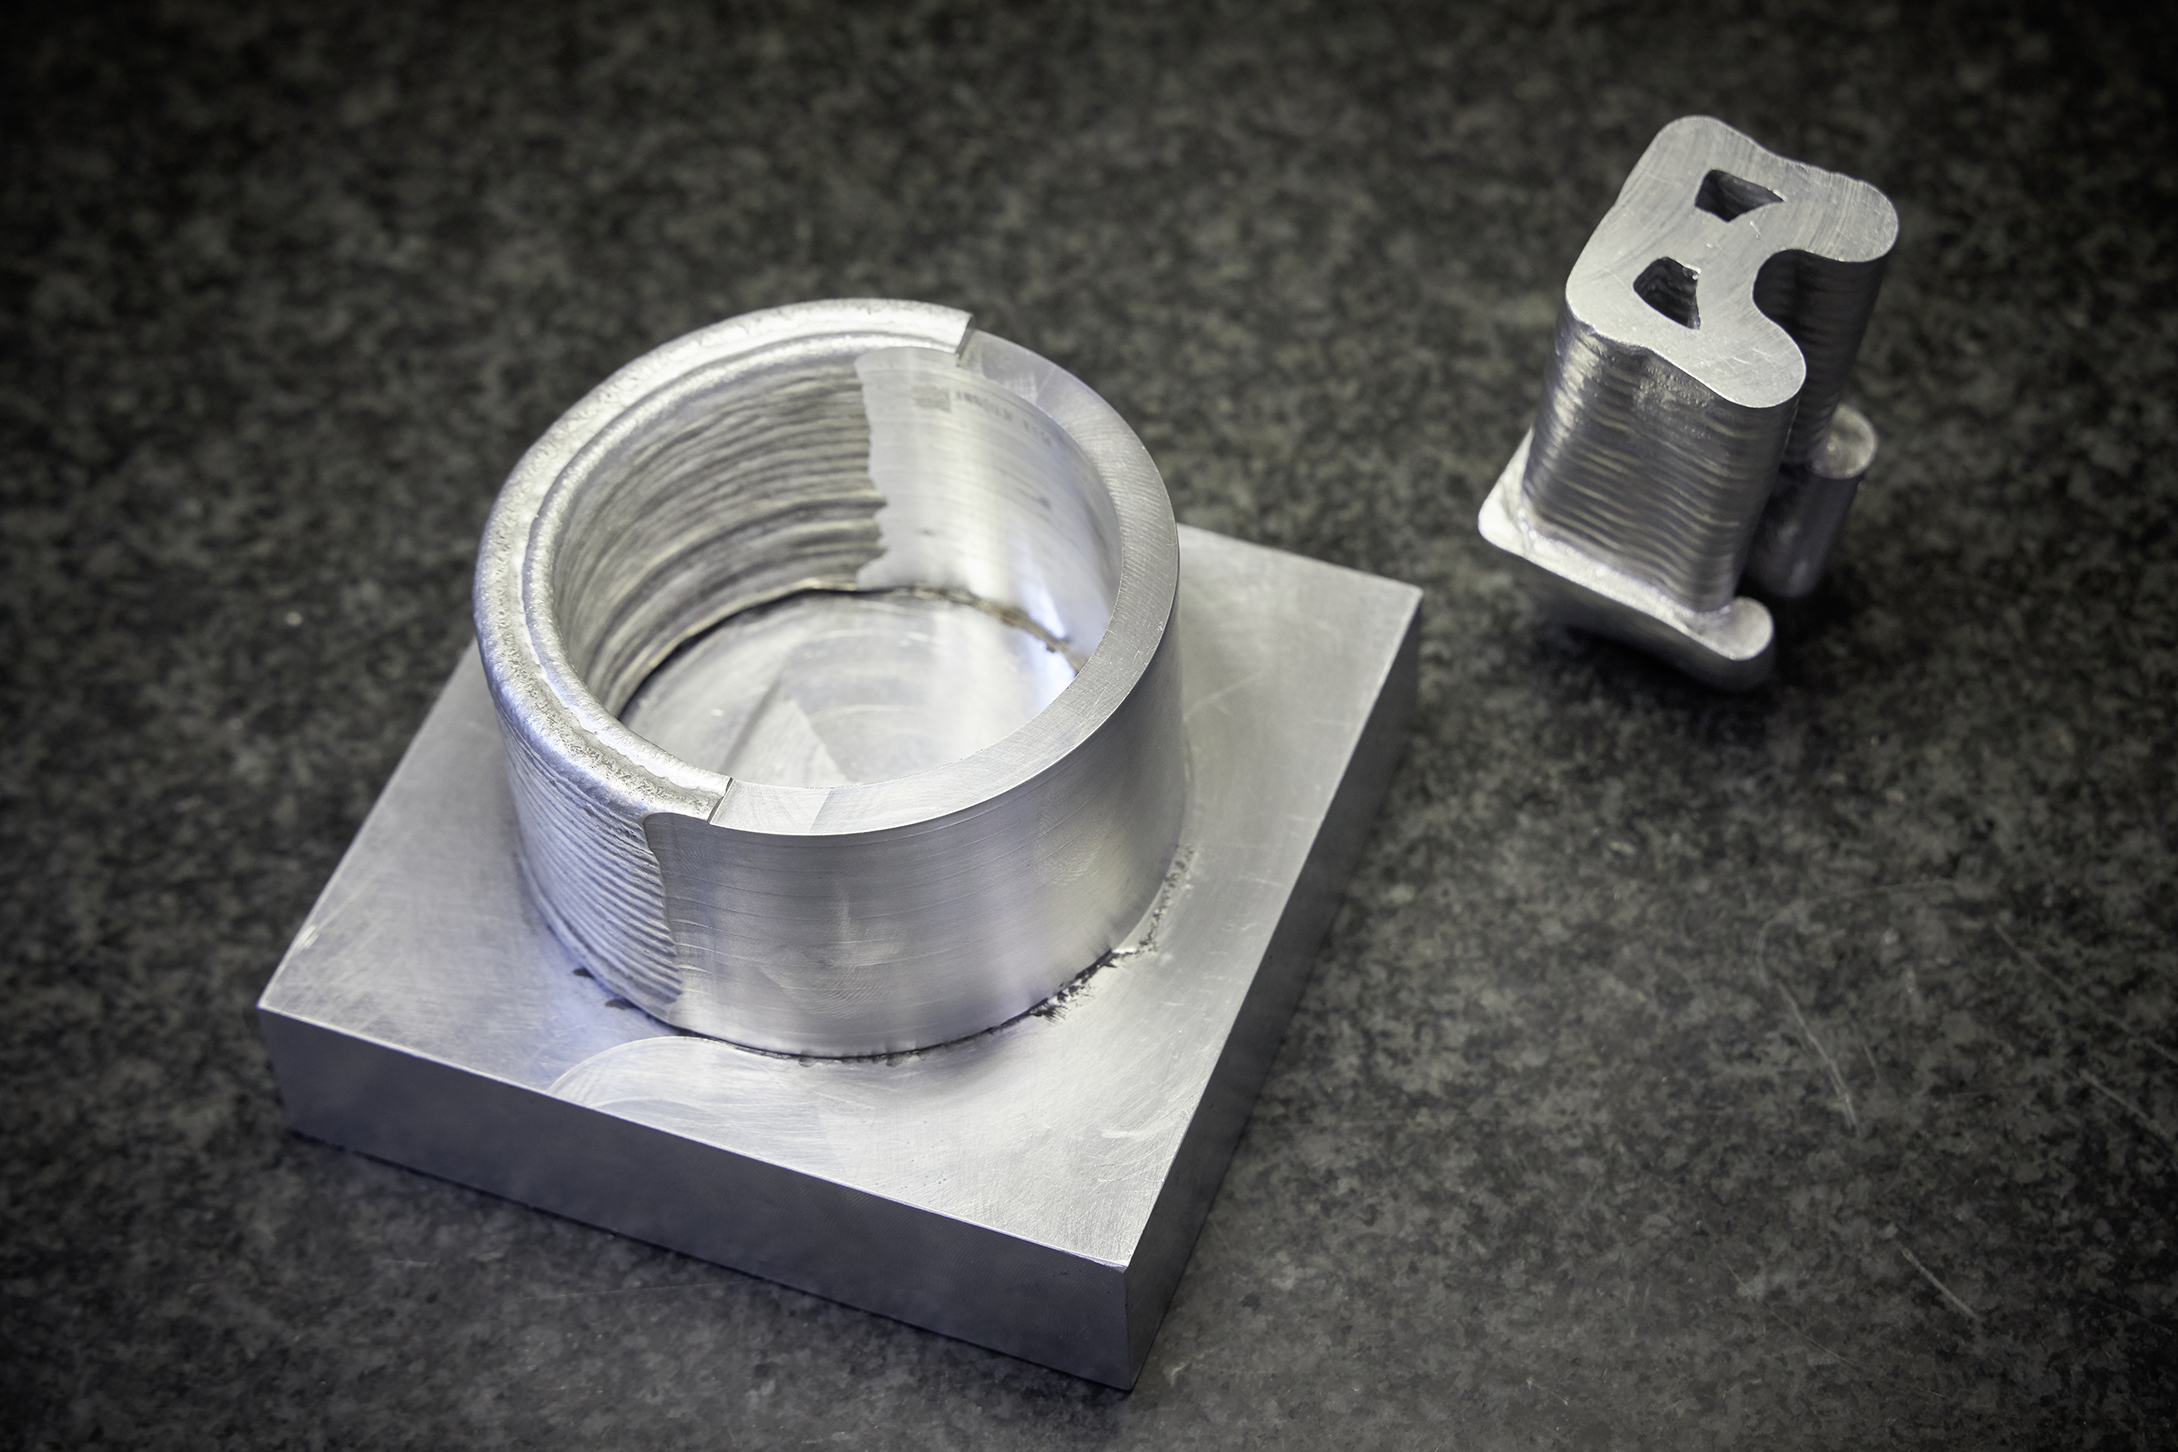 Machined components are put into the precise forms after the deposition welding